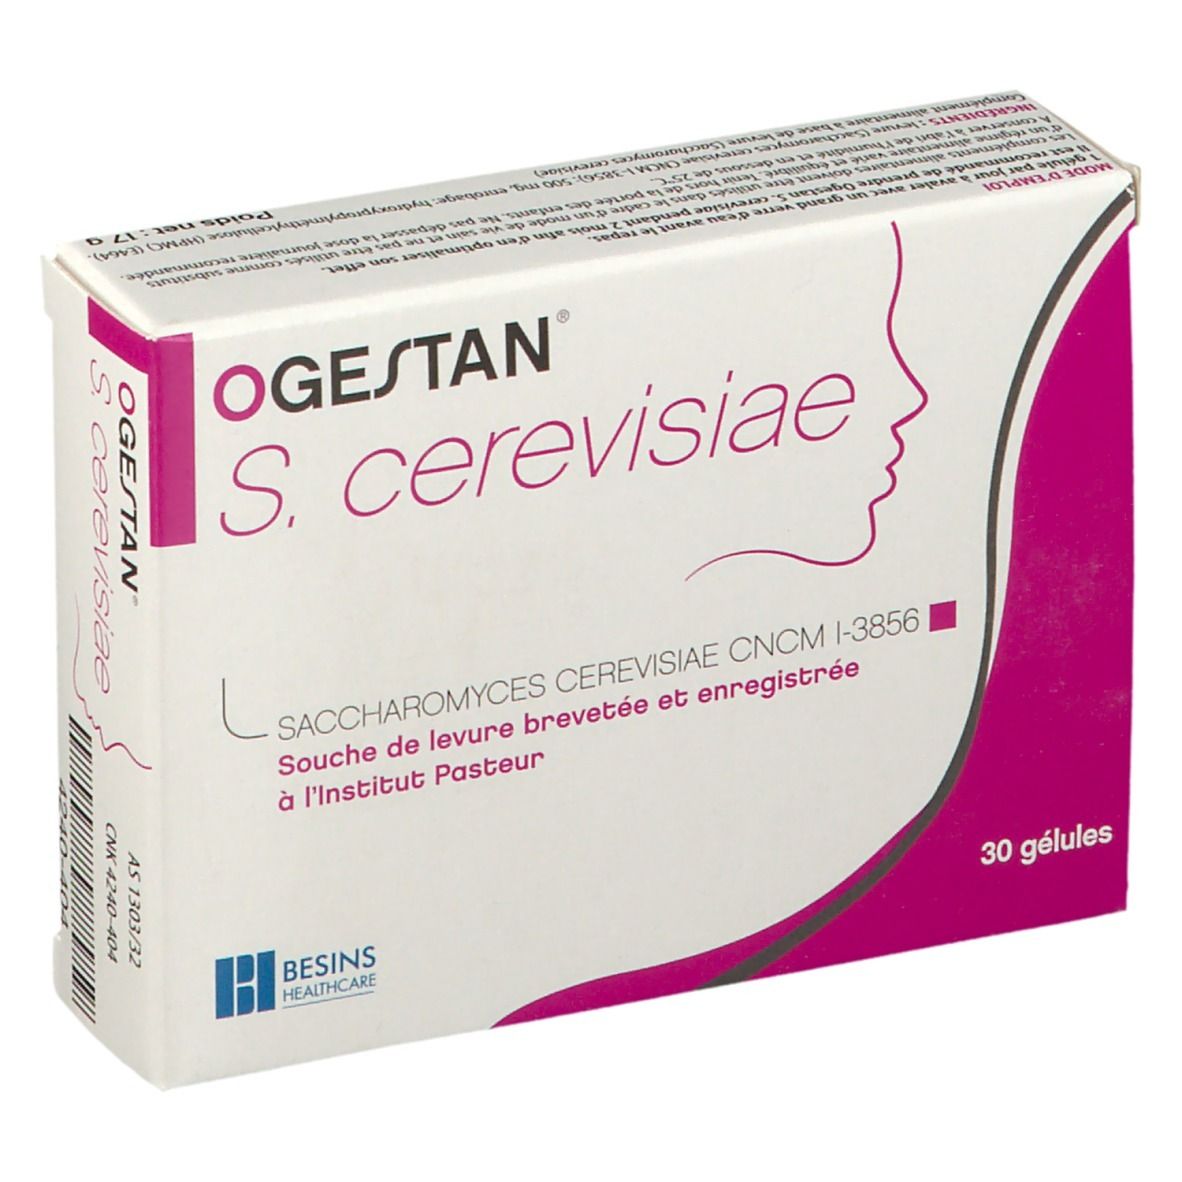 Image of OGESTAN® S. cerevisiae